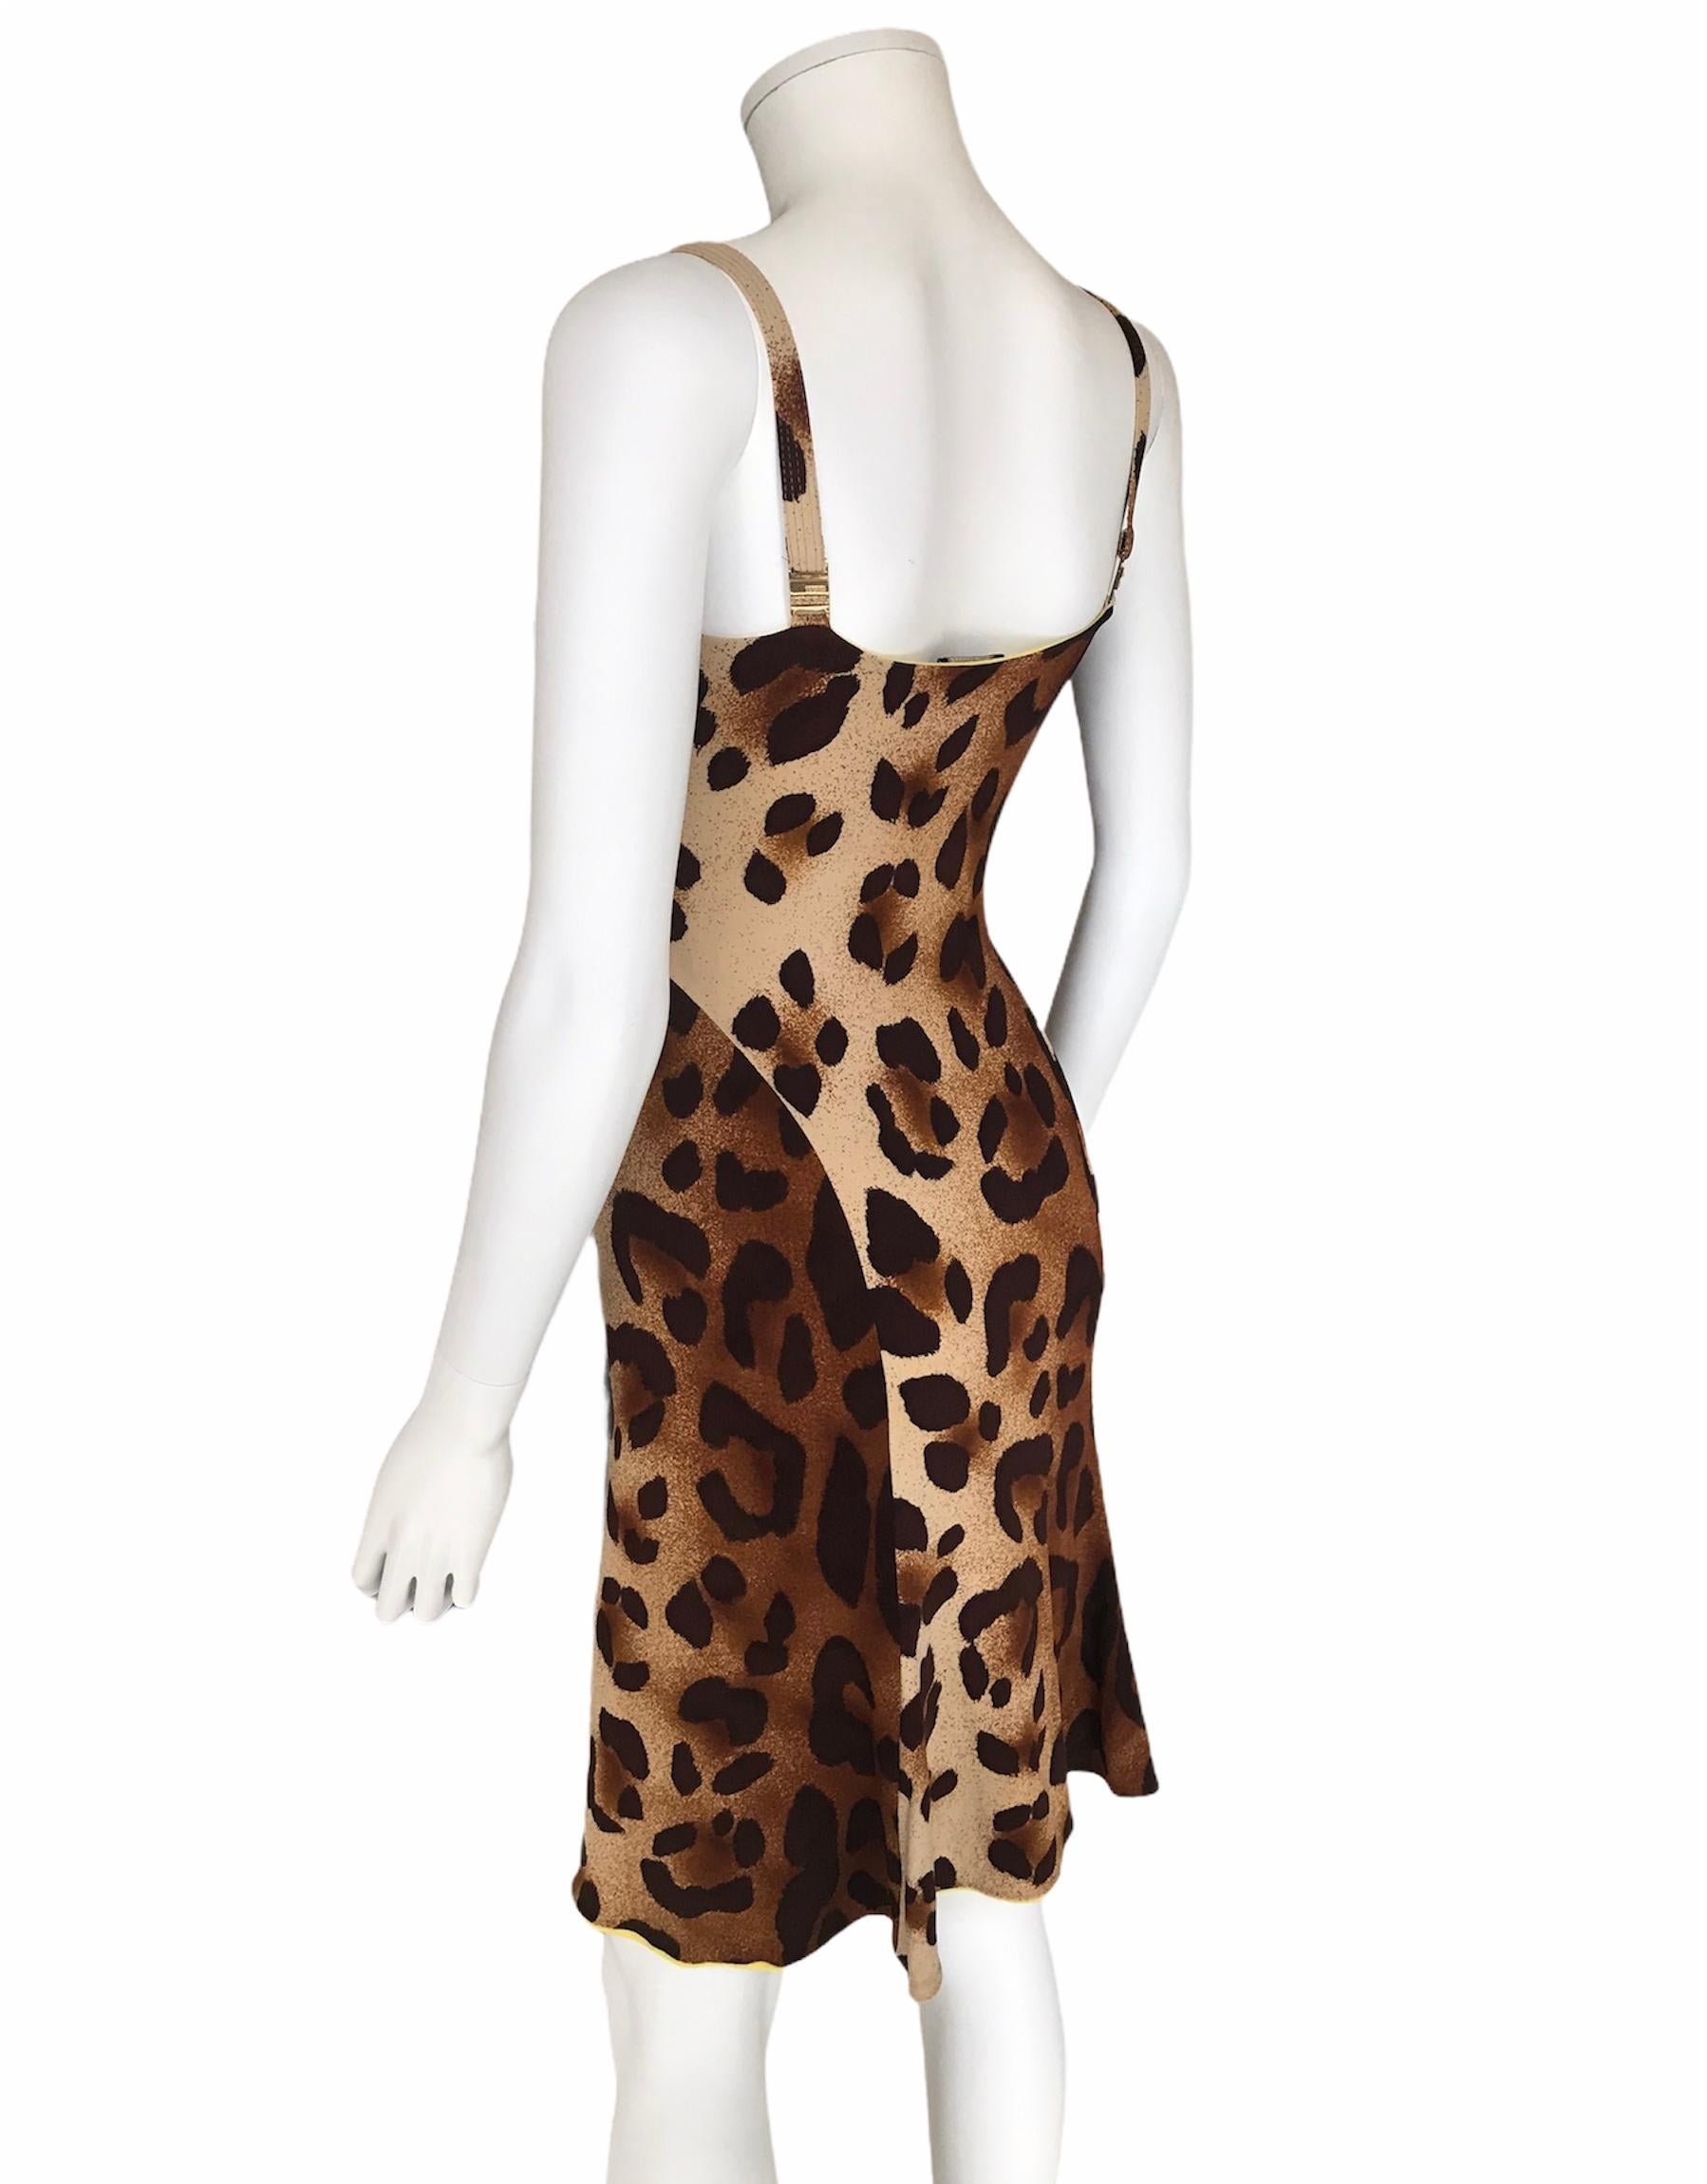 GIANNI VERSACE, Made in Italy, circa 90's. 
Leopard print viscose dress with a lime yellow lining. Very nice fit on the hips. Stretch fabric. 
Size tag is IT40. Recommended for Small or 36EU.

Every item is rare and carefully selected. Measurements,